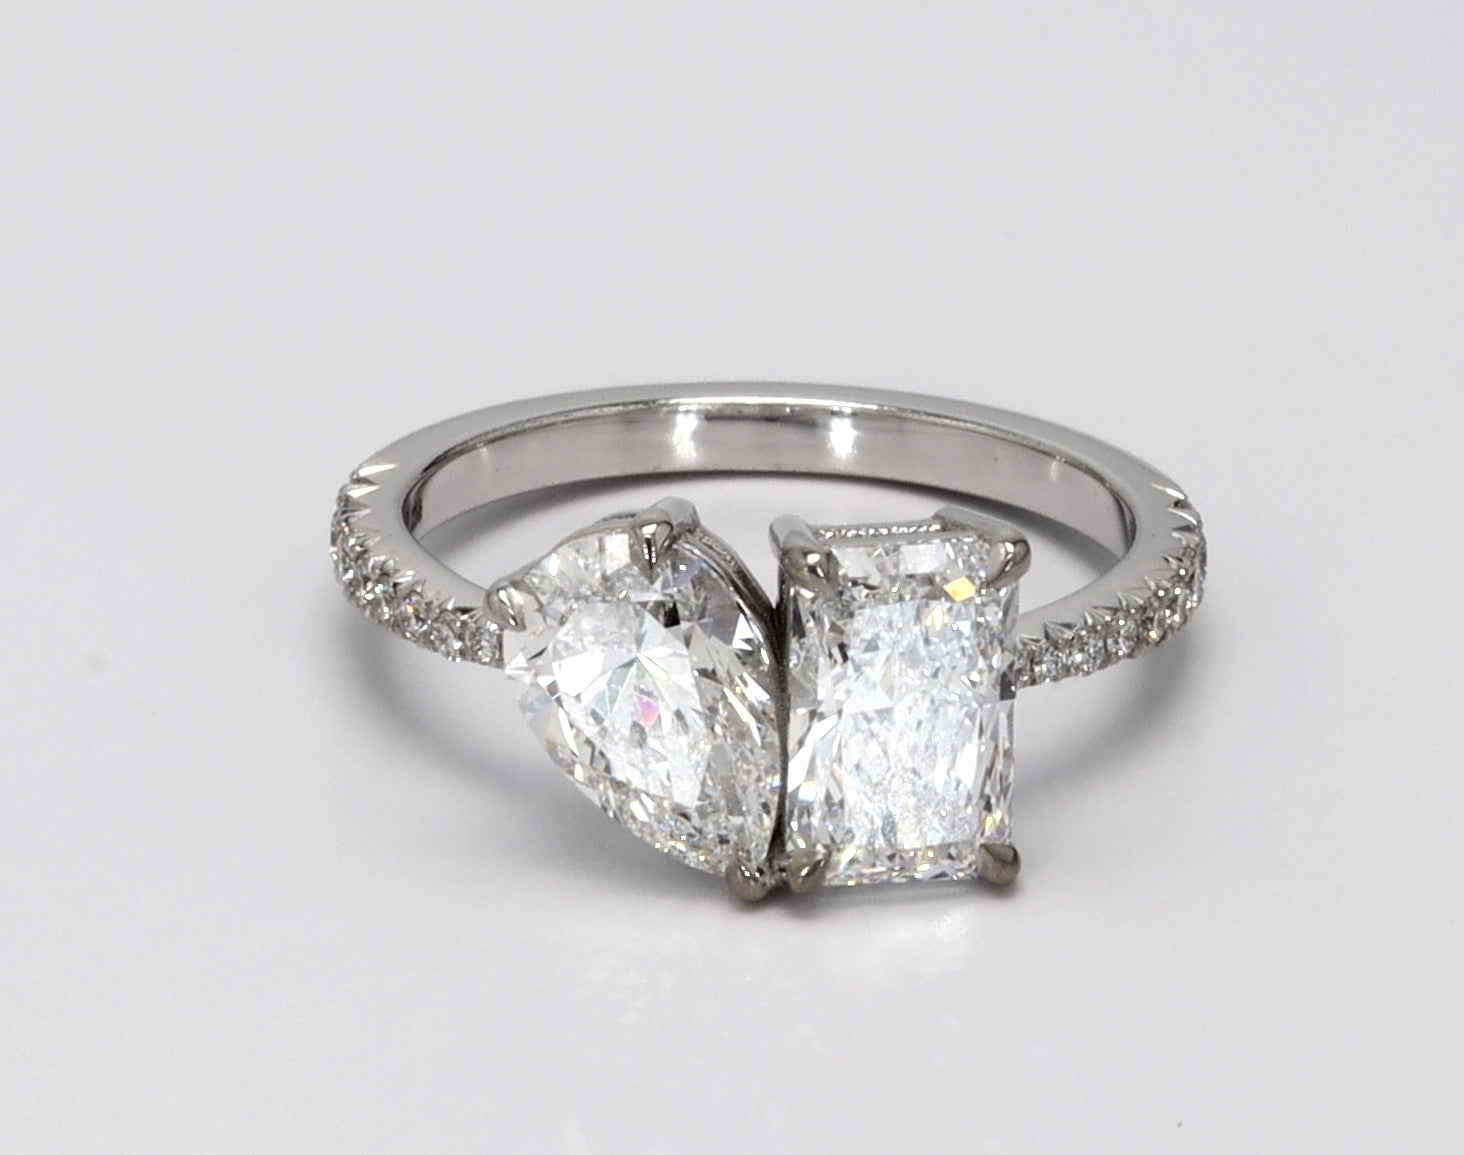 Radiant and Pear Diamond Engagement Ring with Whitegold setting.